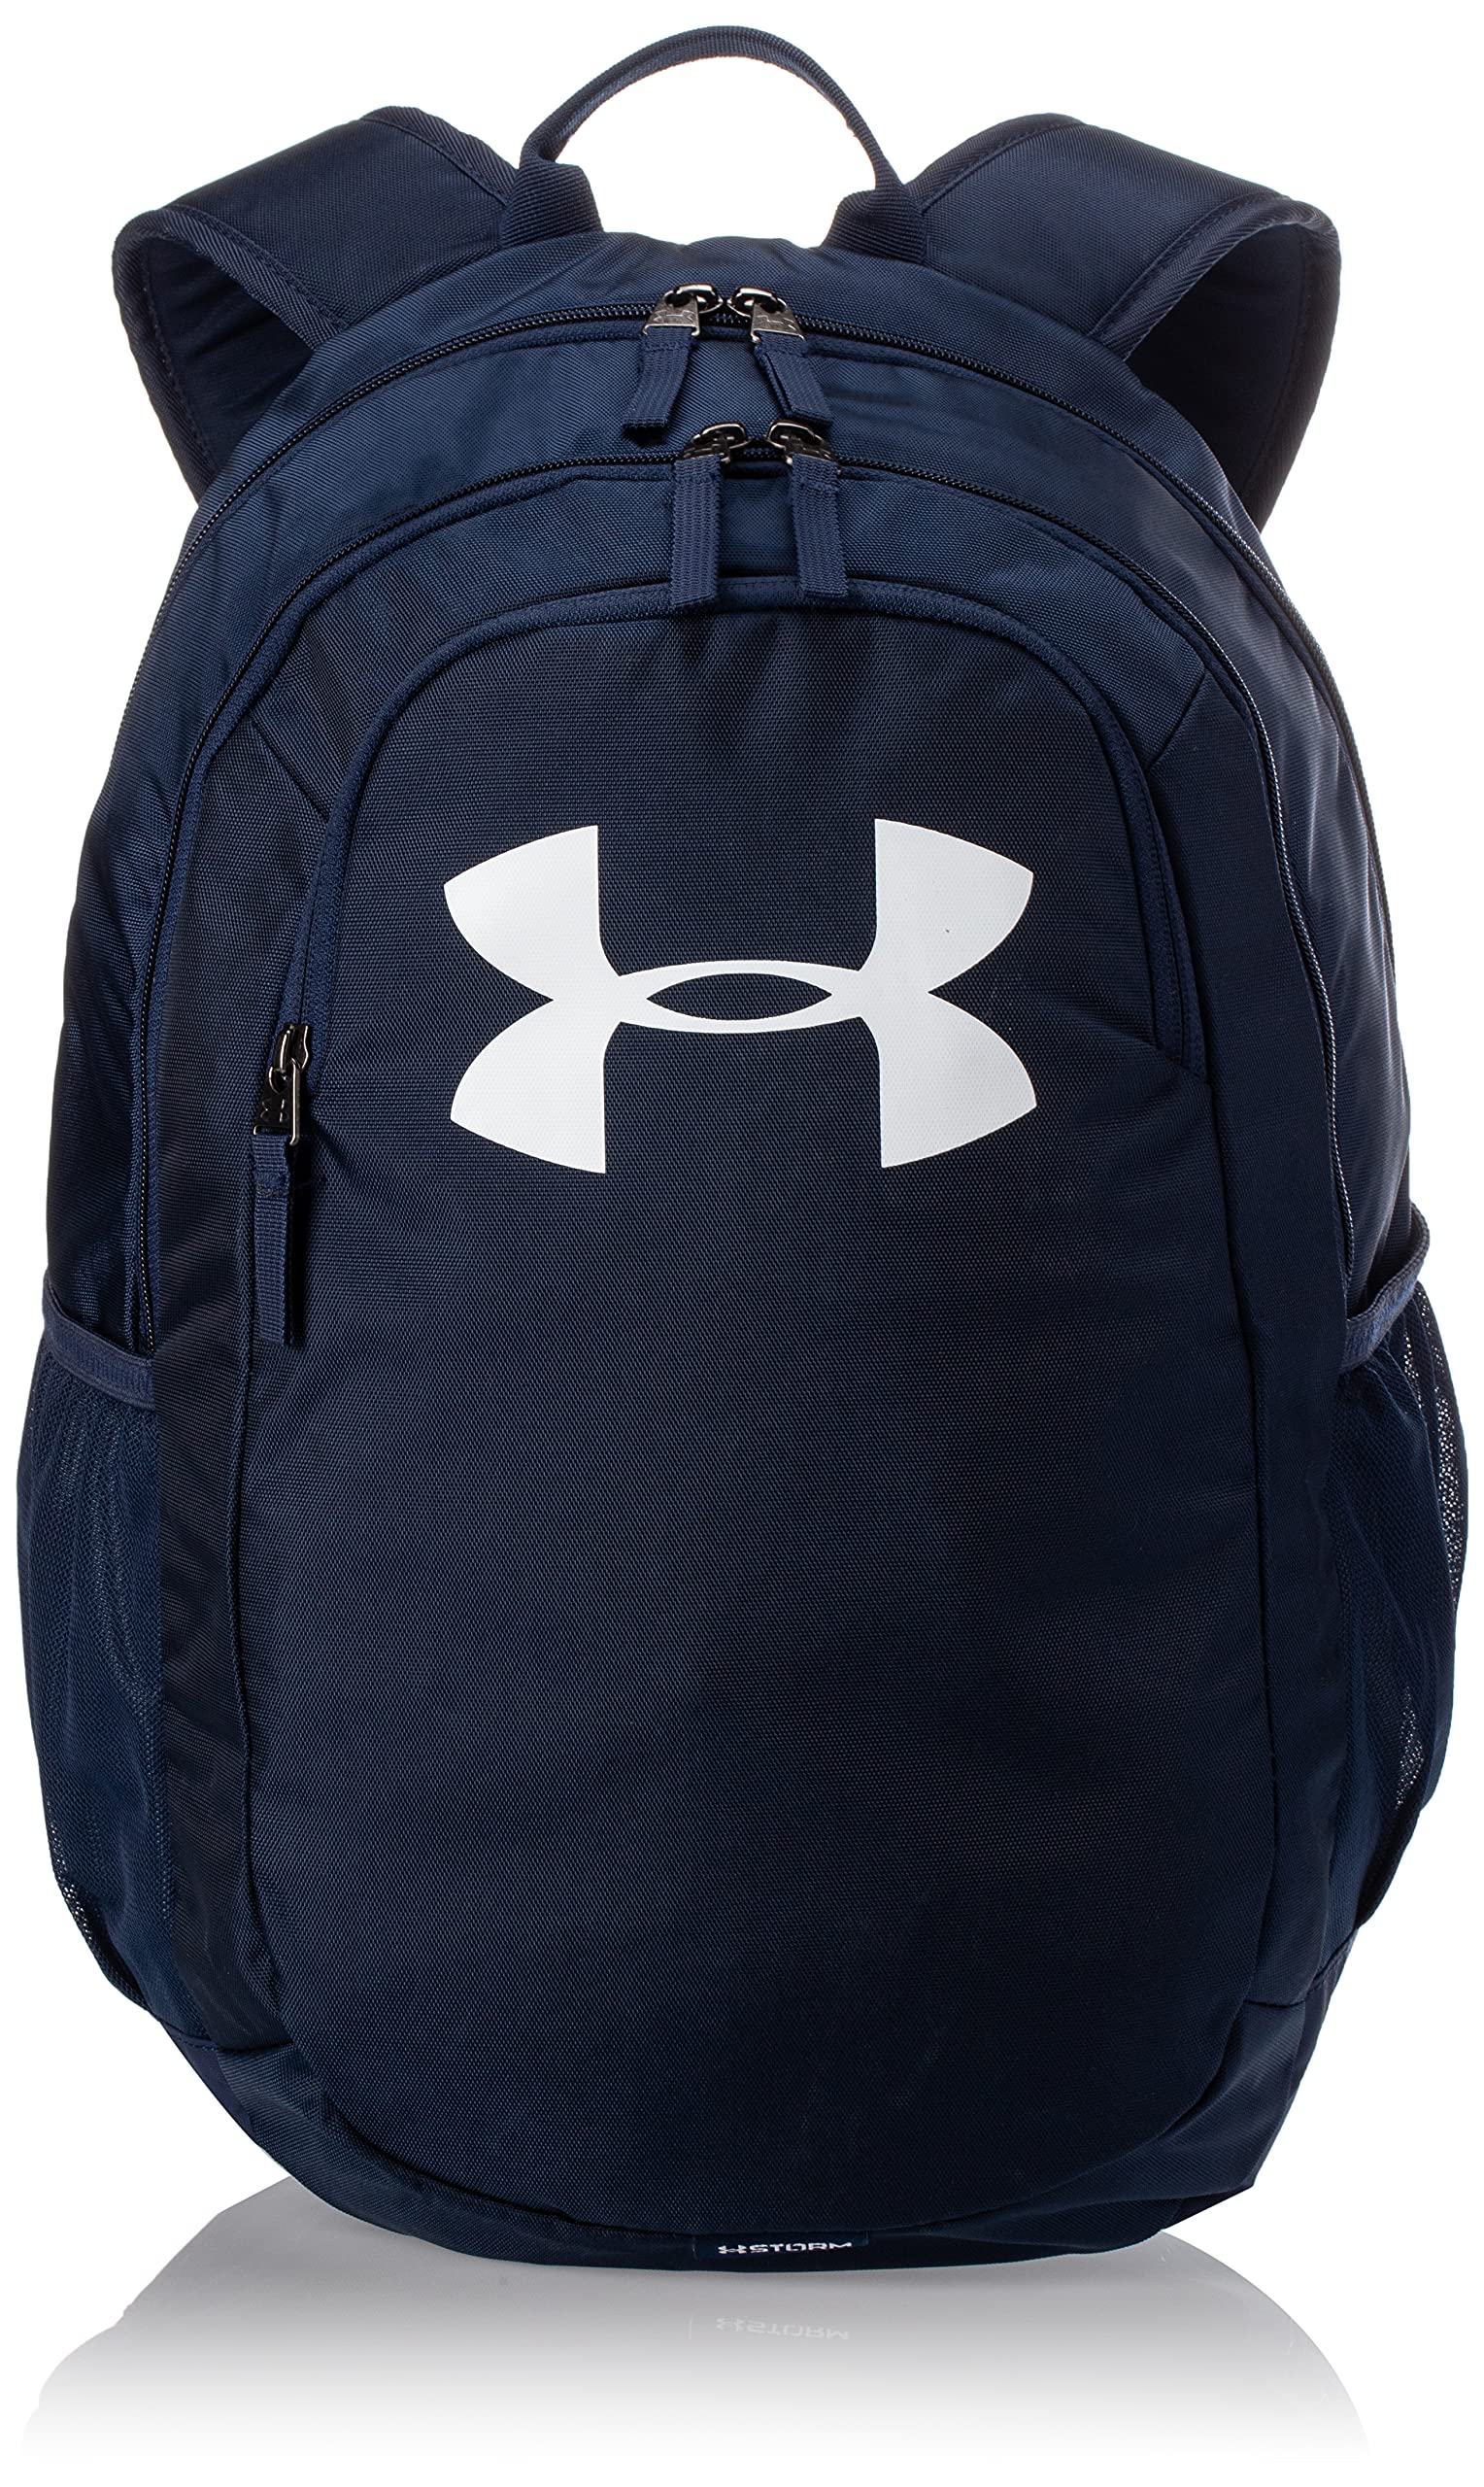 Under Armour Adult Scrimmage Backpack 2.0